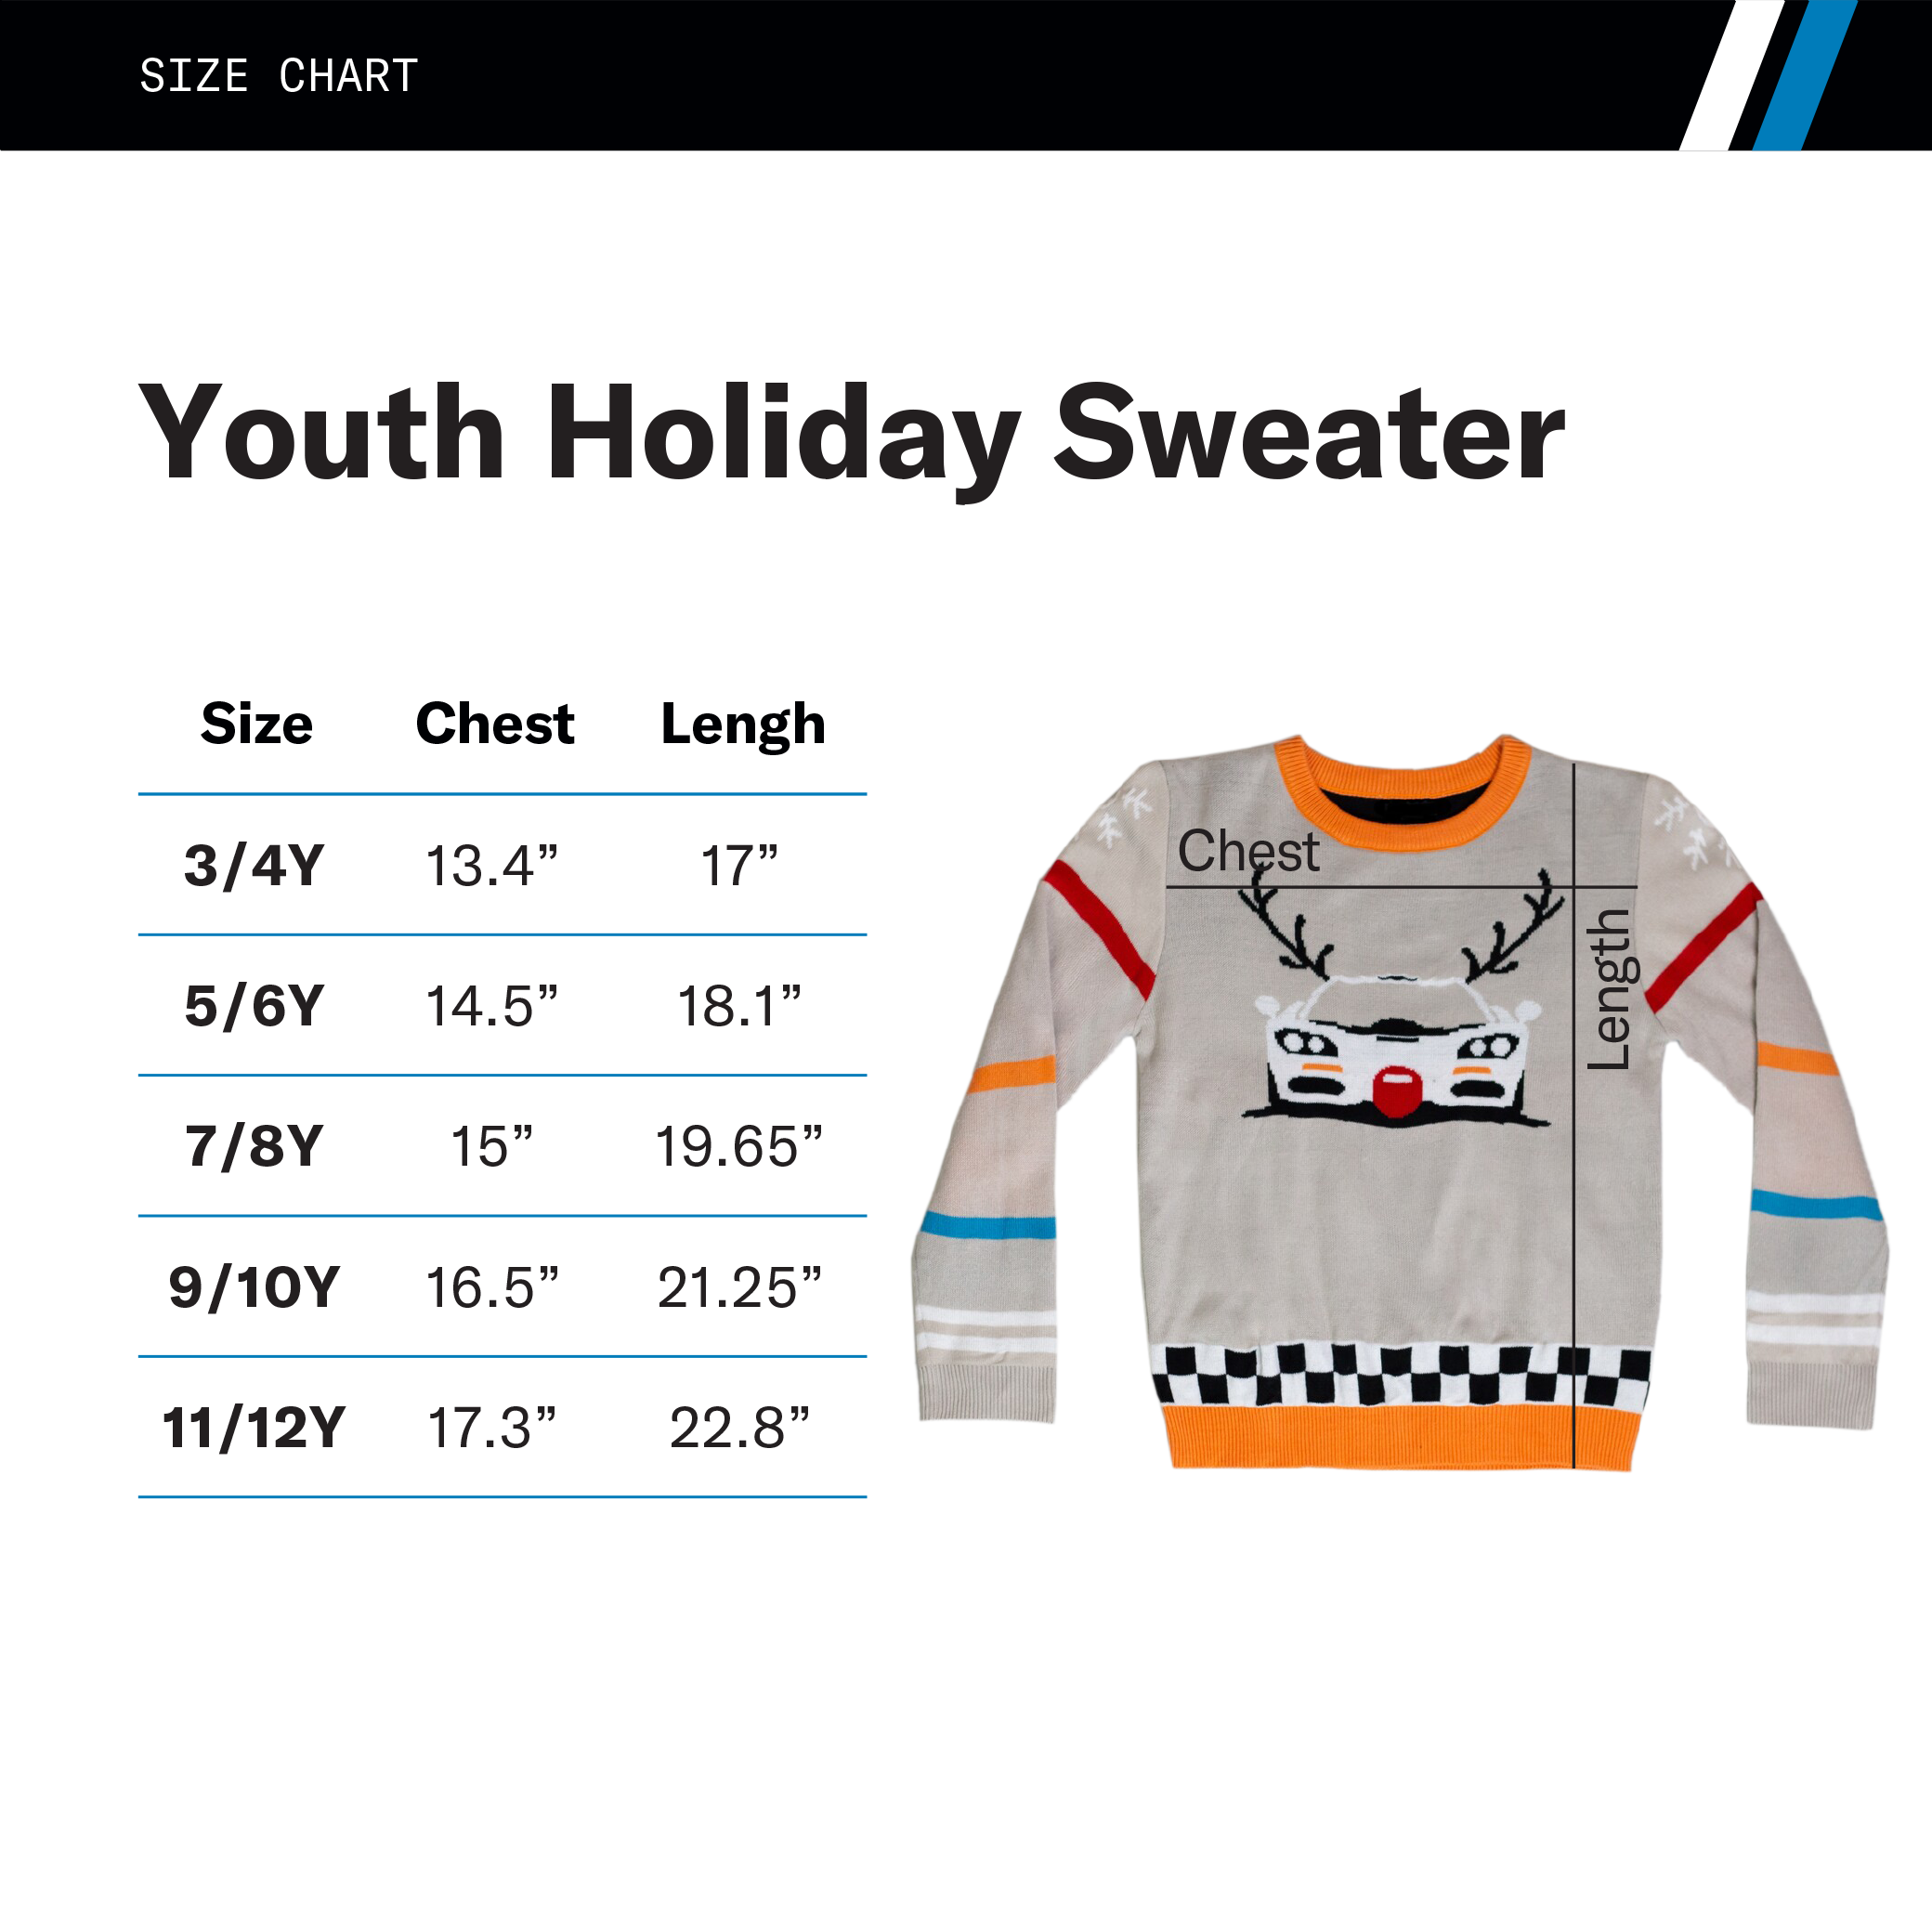 Youth Holiday Sweater